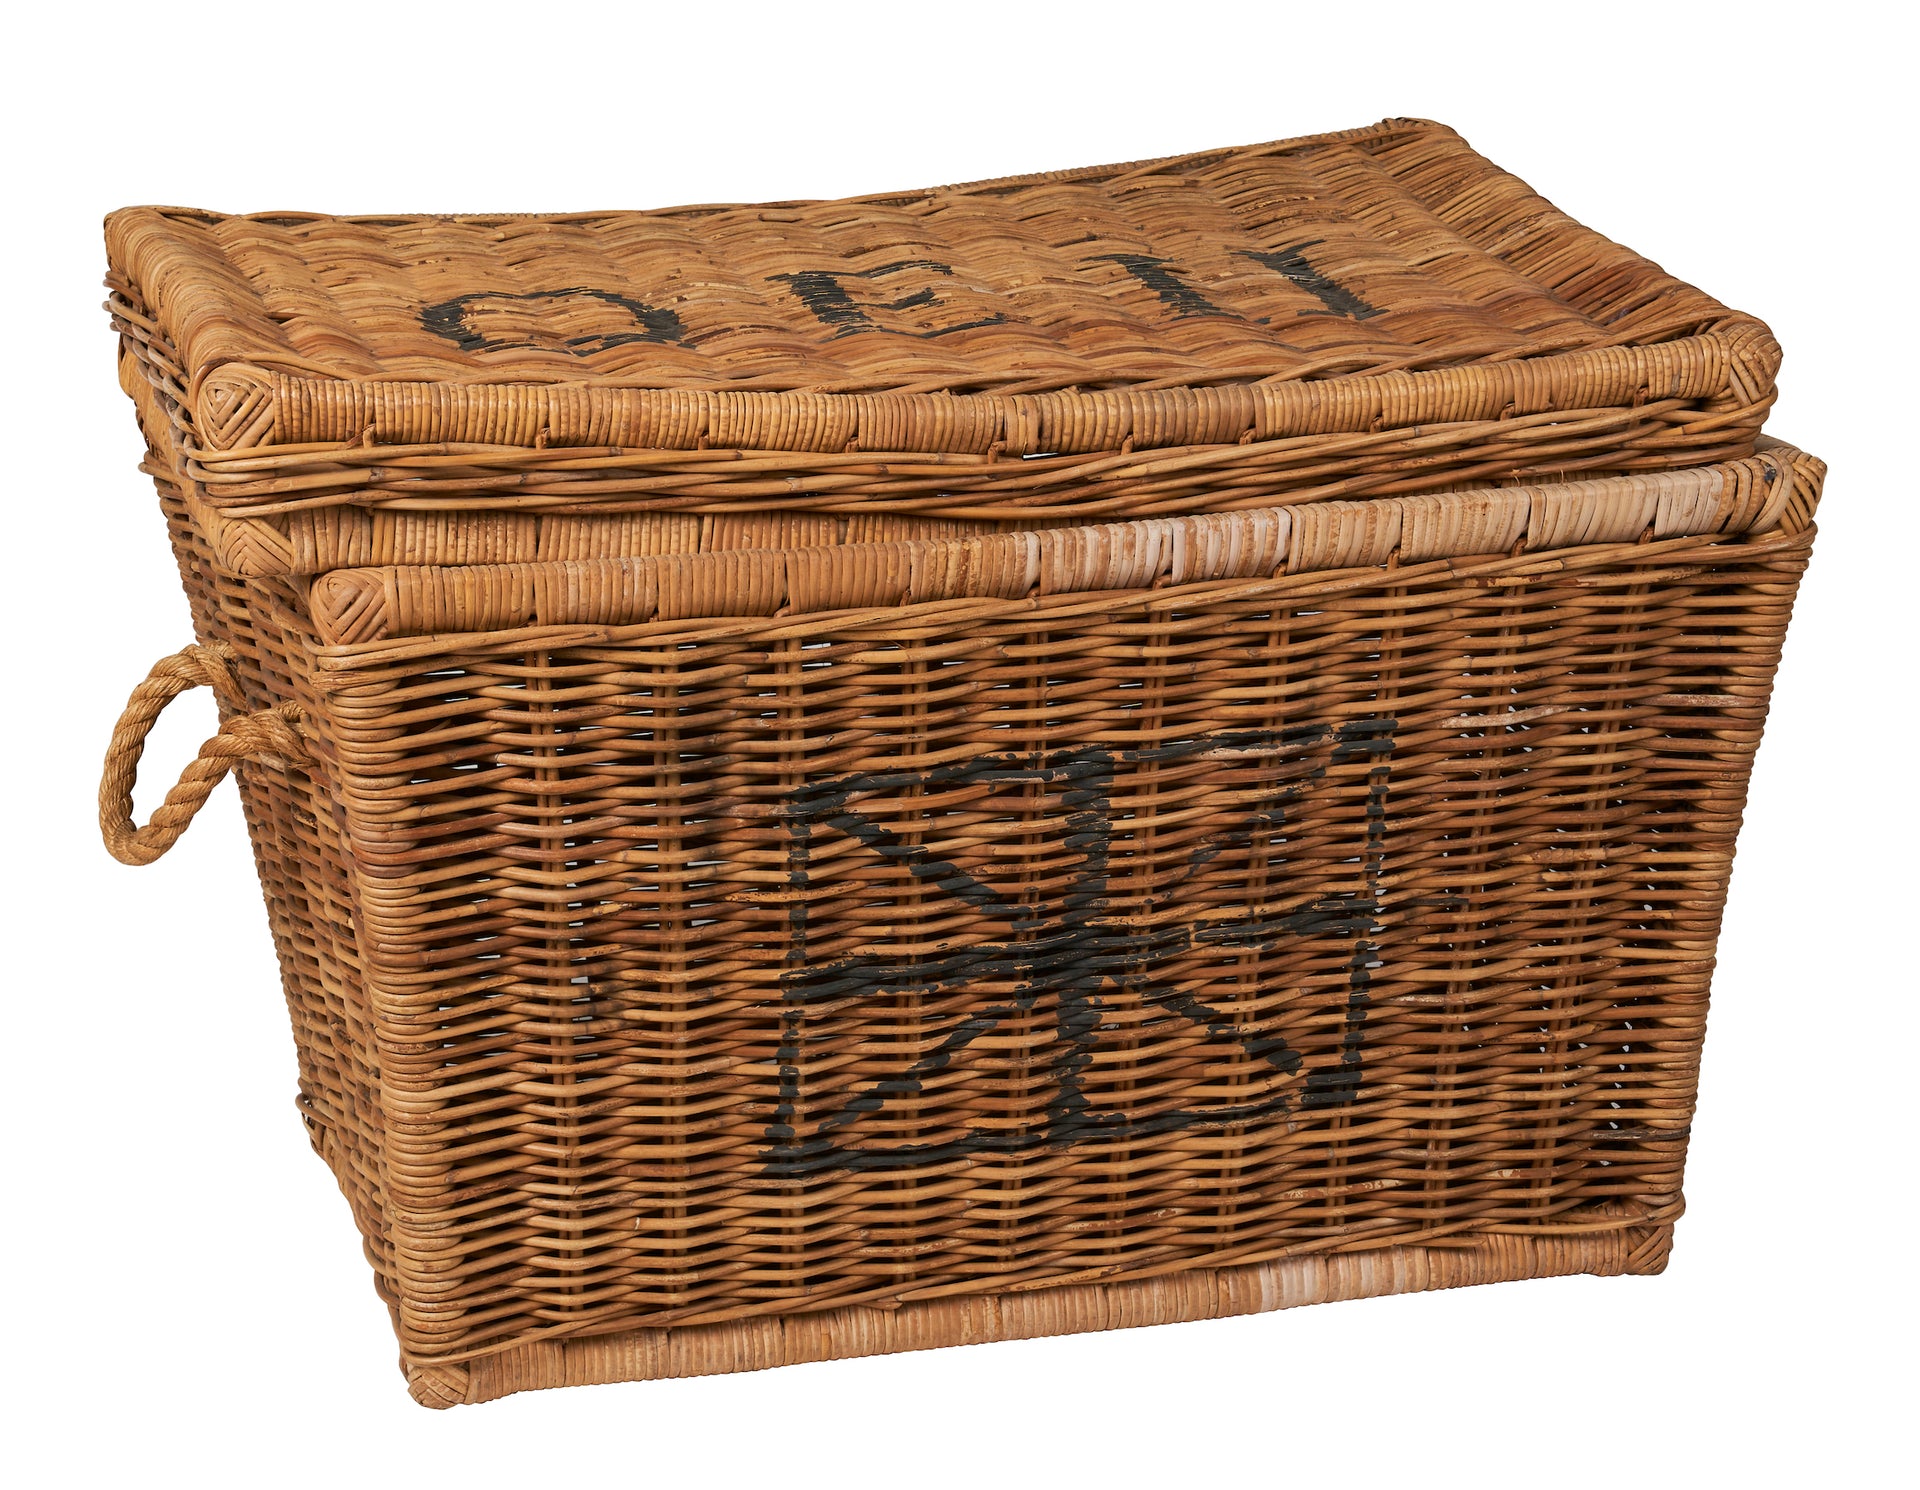 SOLD A large wicker hamper with painted letters and flag design, French Circa 1900